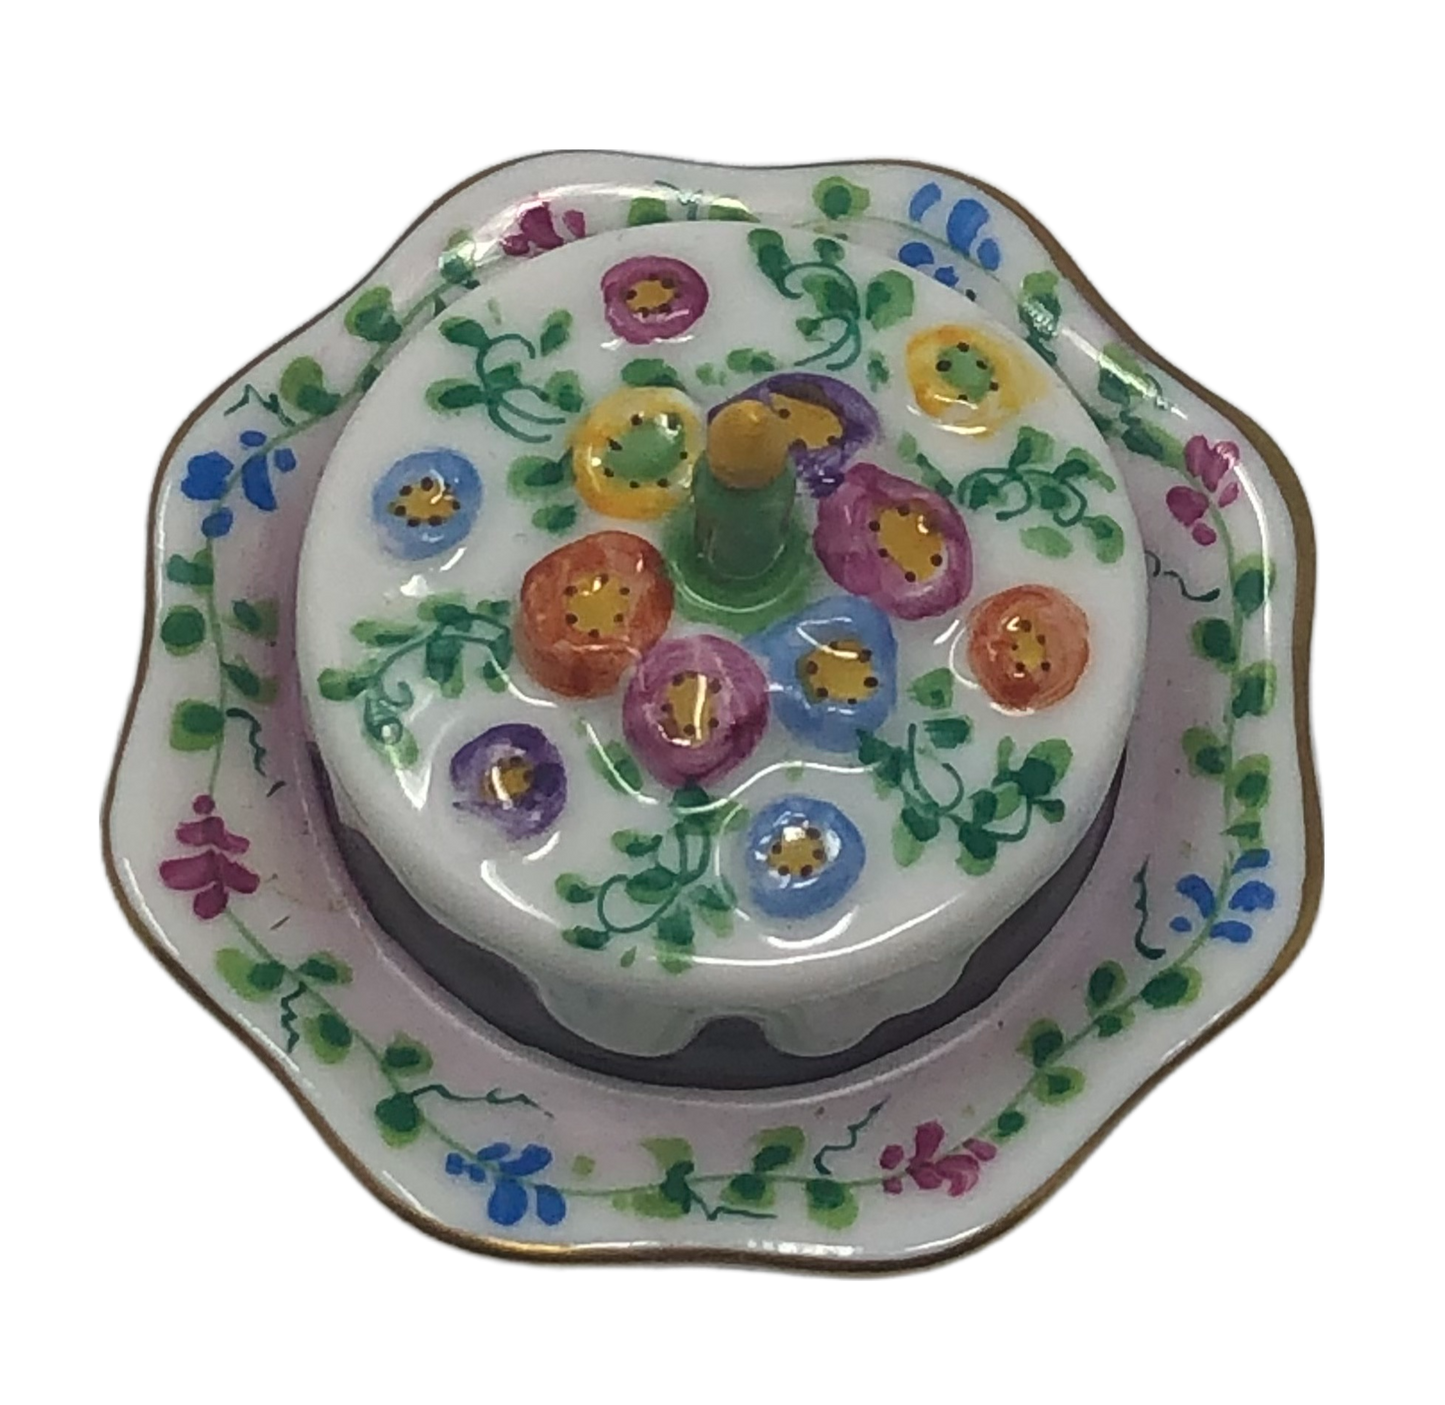 Blooming Delights: Floral Birthday Cake Limoges Box